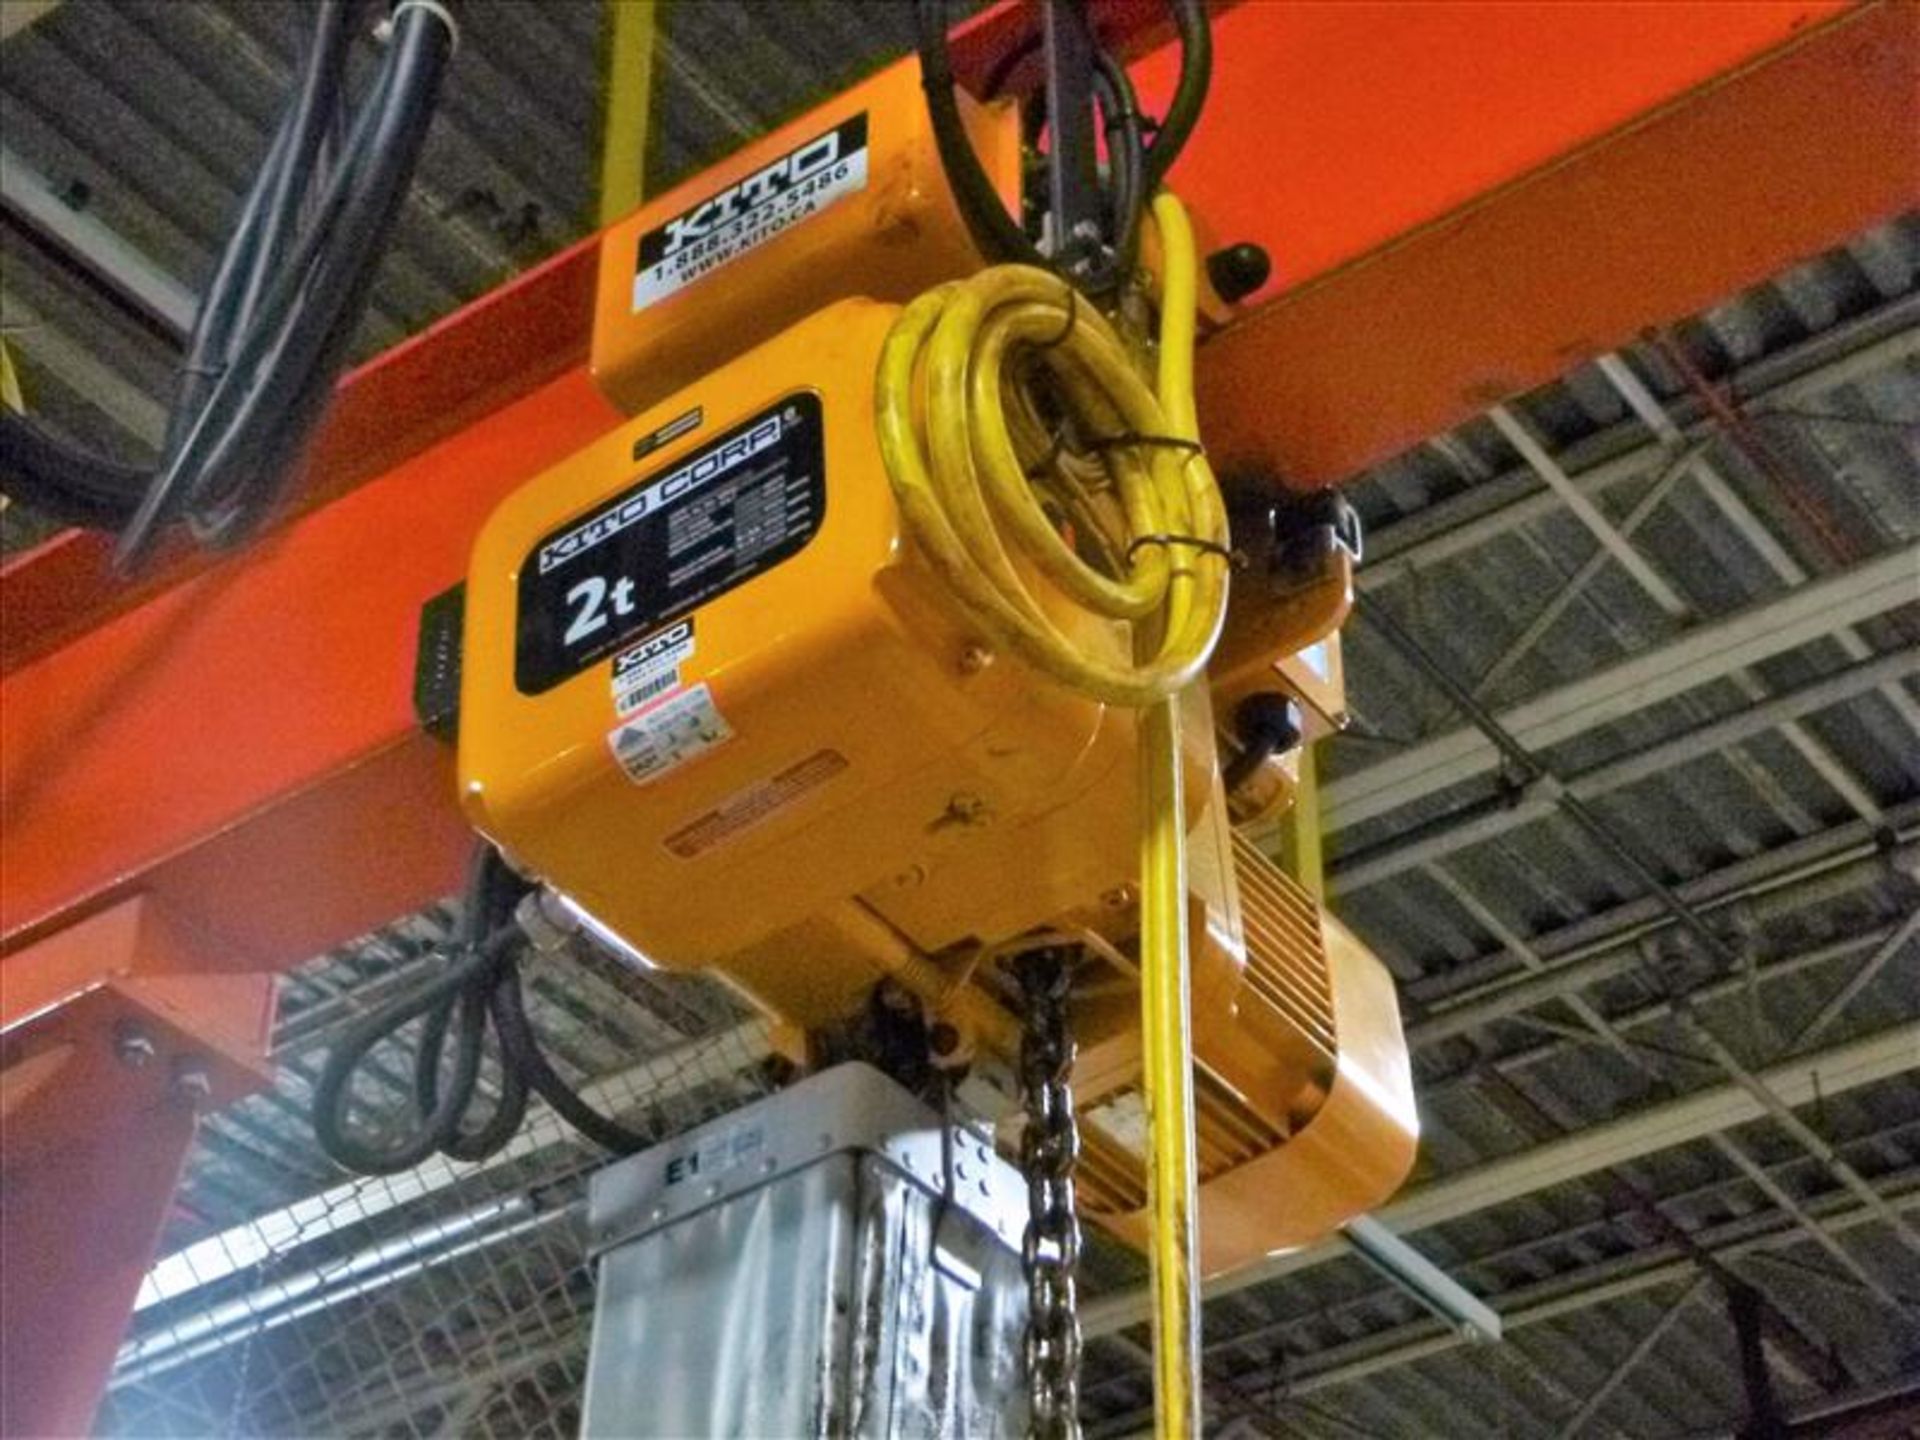 Carney battery lifting system w/ A-frame gantry, 2-ton cap., Kito 2-ton electric chain hoist and - Image 2 of 3